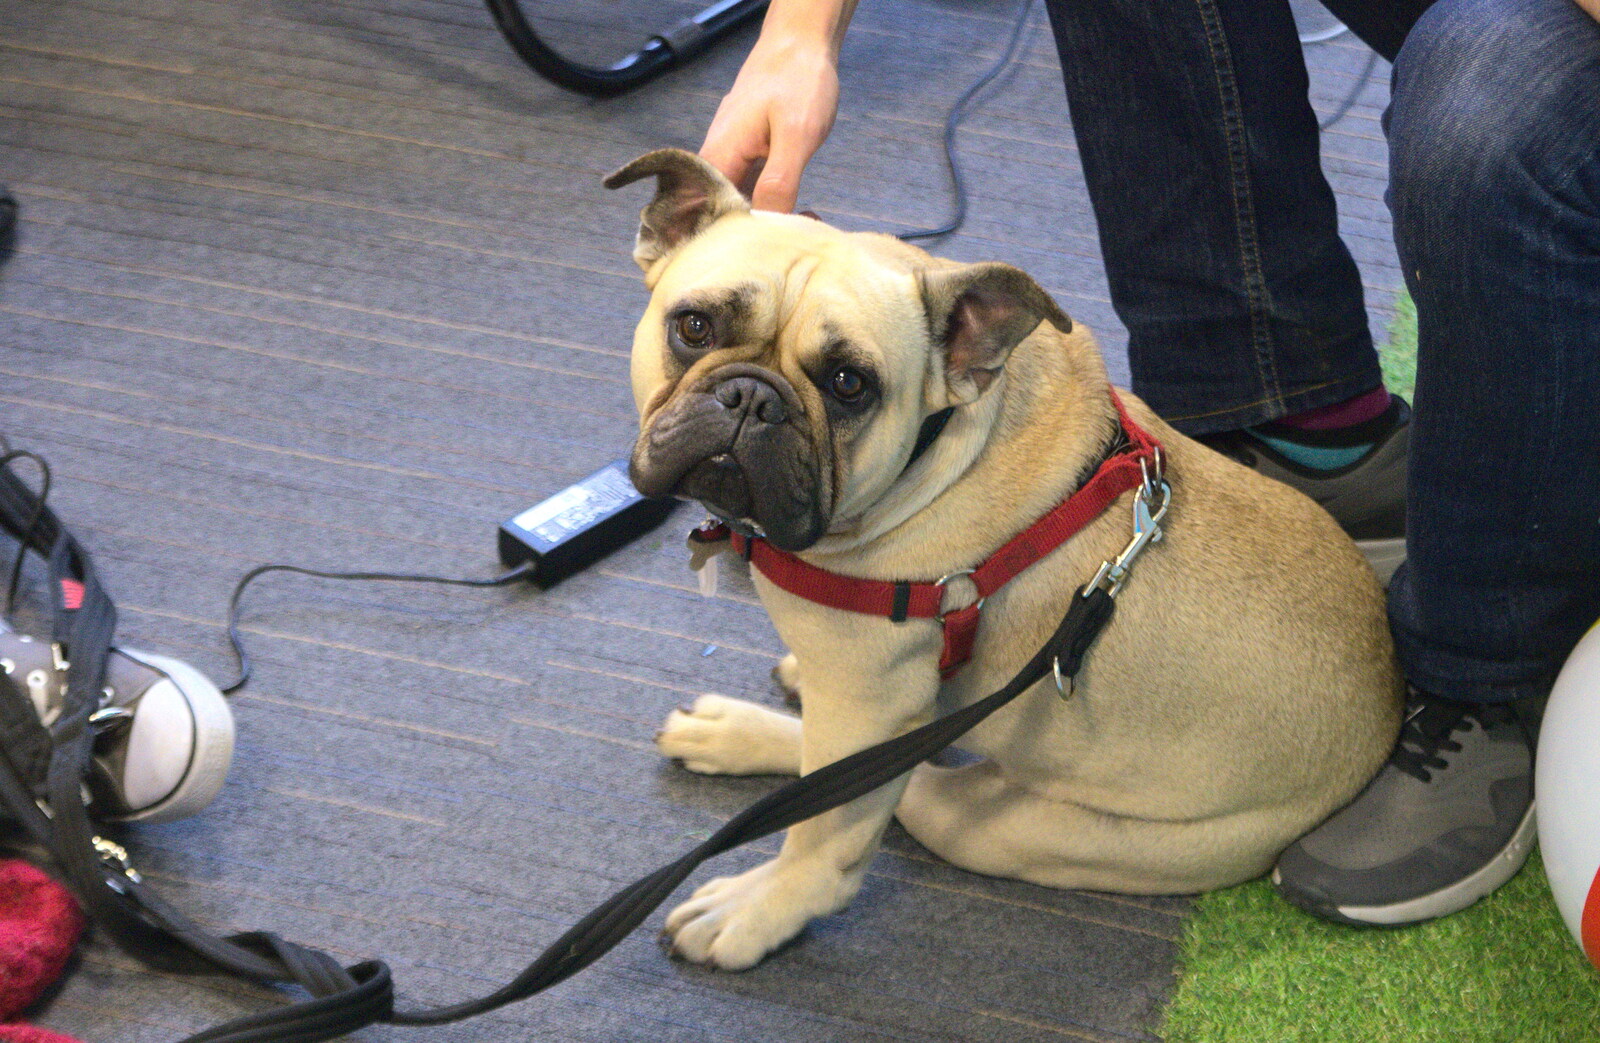 It's bring your dog to work day from SwiftKey Innovation Week, Southwark Bridge Road, London - 7th October 2015